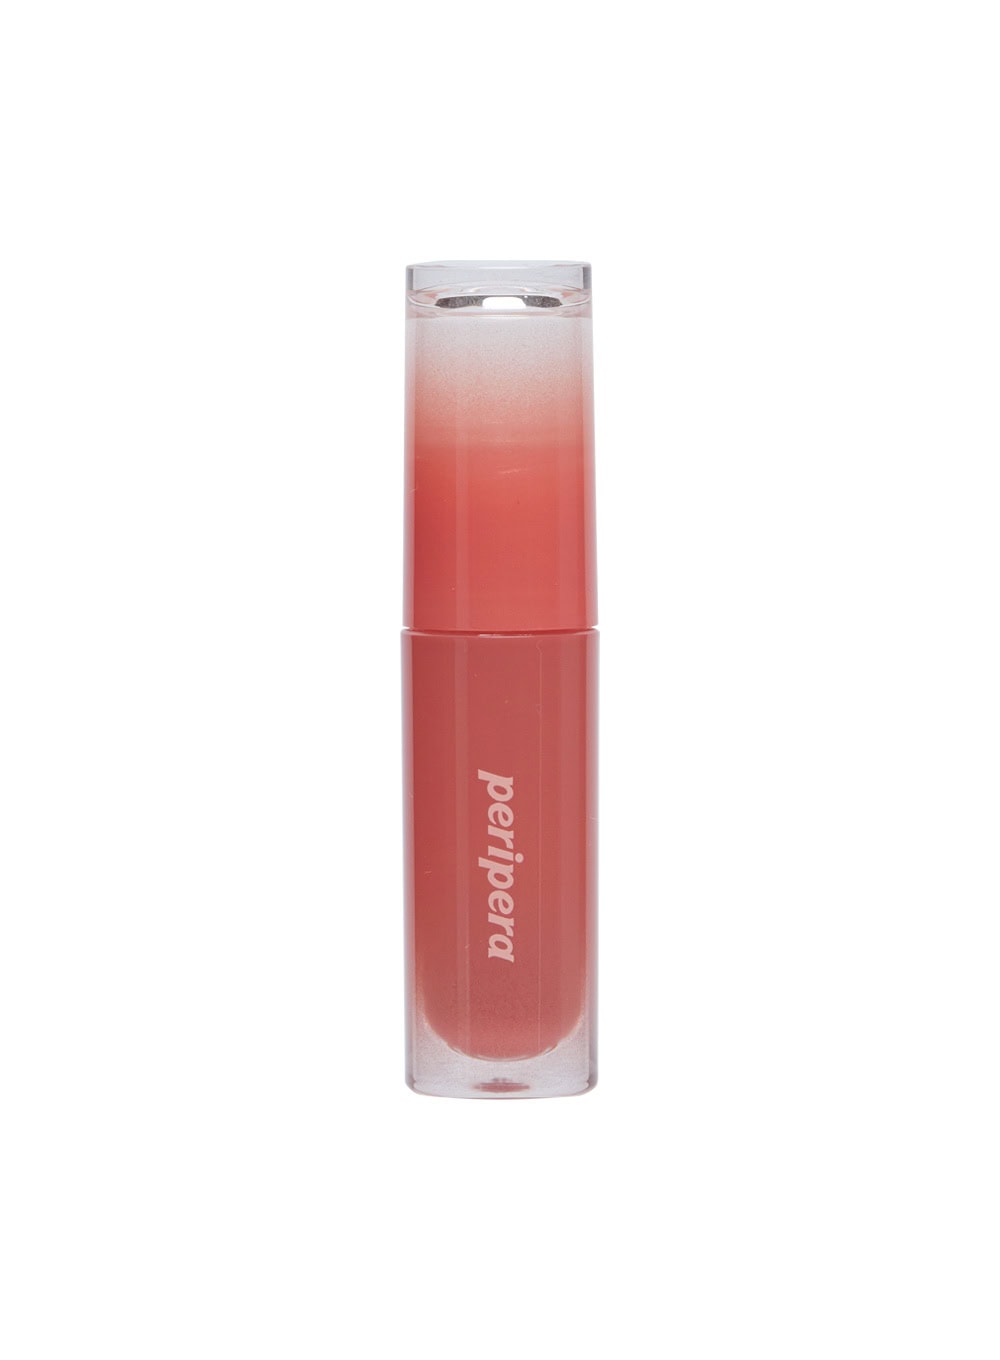 Ink Mood Glowy Tint (4g) - 02 CORAL INFLUENCER